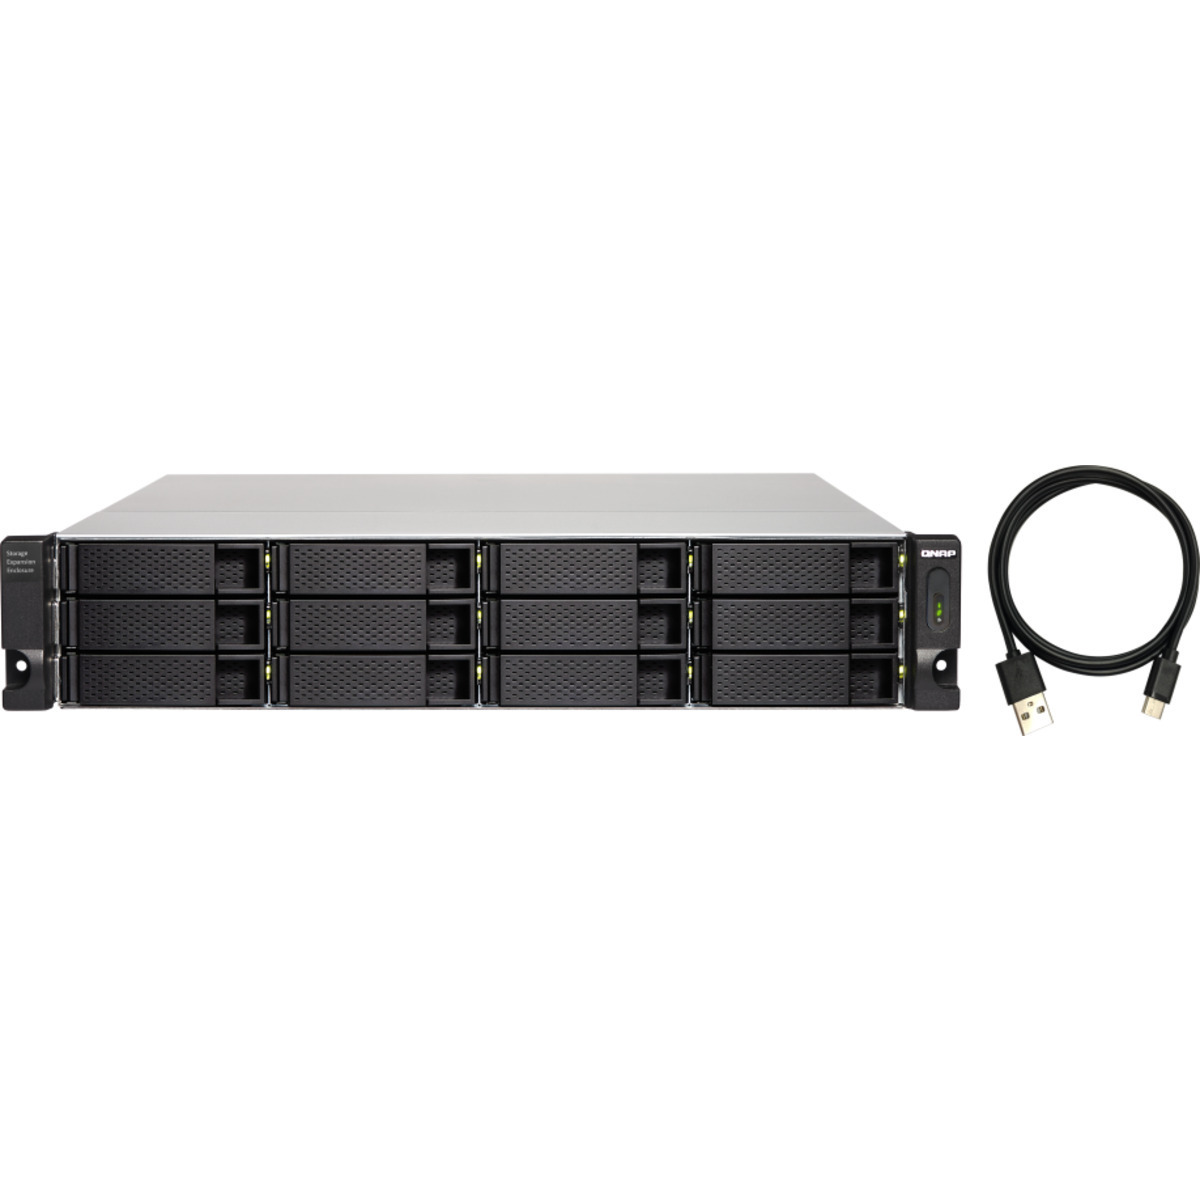 QNAP TL-R1200C-RP External Expansion Drive 112tb 12-Bay RackMount Multimedia / Power User / Business Expansion Enclosure 7x16tb Seagate IronWolf Pro ST16000NT001 3.5 7200rpm SATA 6Gb/s HDD NAS Class Drives Installed - Burn-In Tested - ON SALE TL-R1200C-RP External Expansion Drive